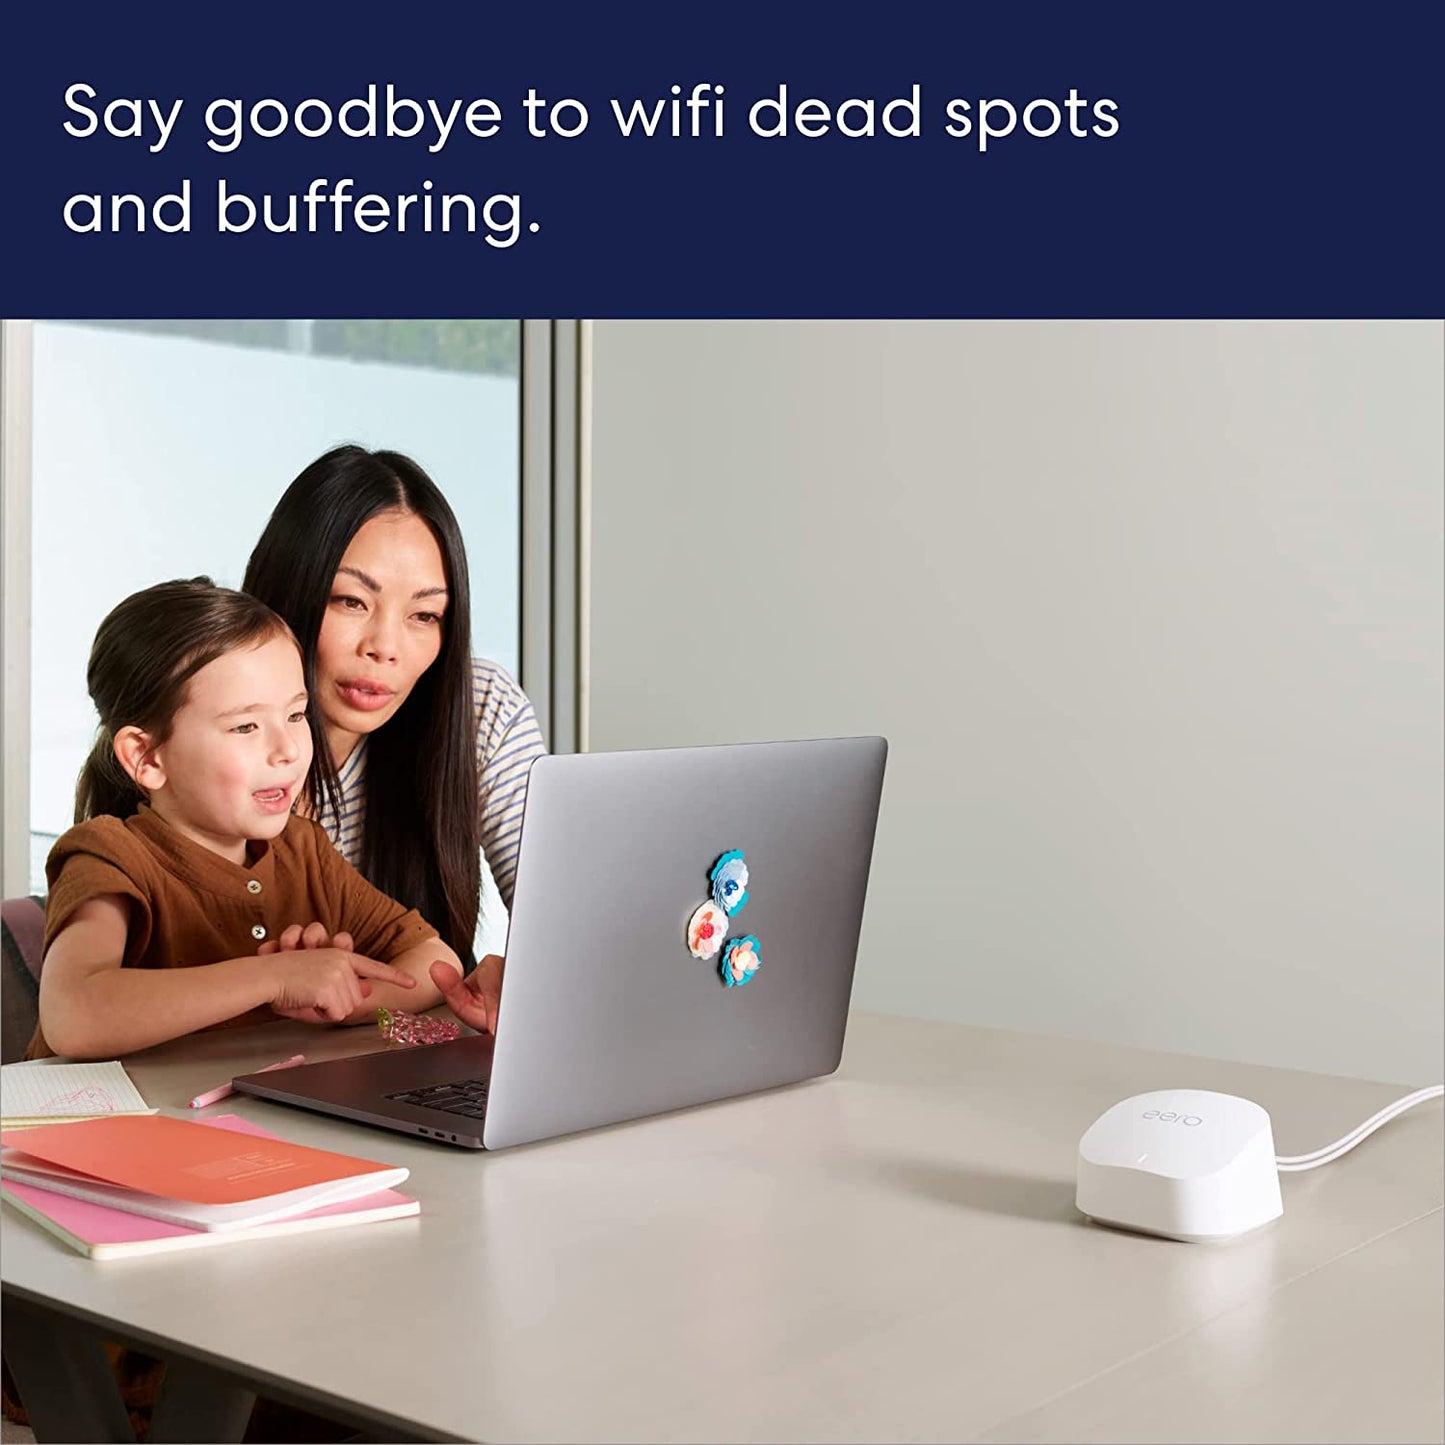 Introducing The eero 6+ dual-band mesh Wi-Fi 6 router, with built-in Zigbee smart home hub and 160MHz client device support